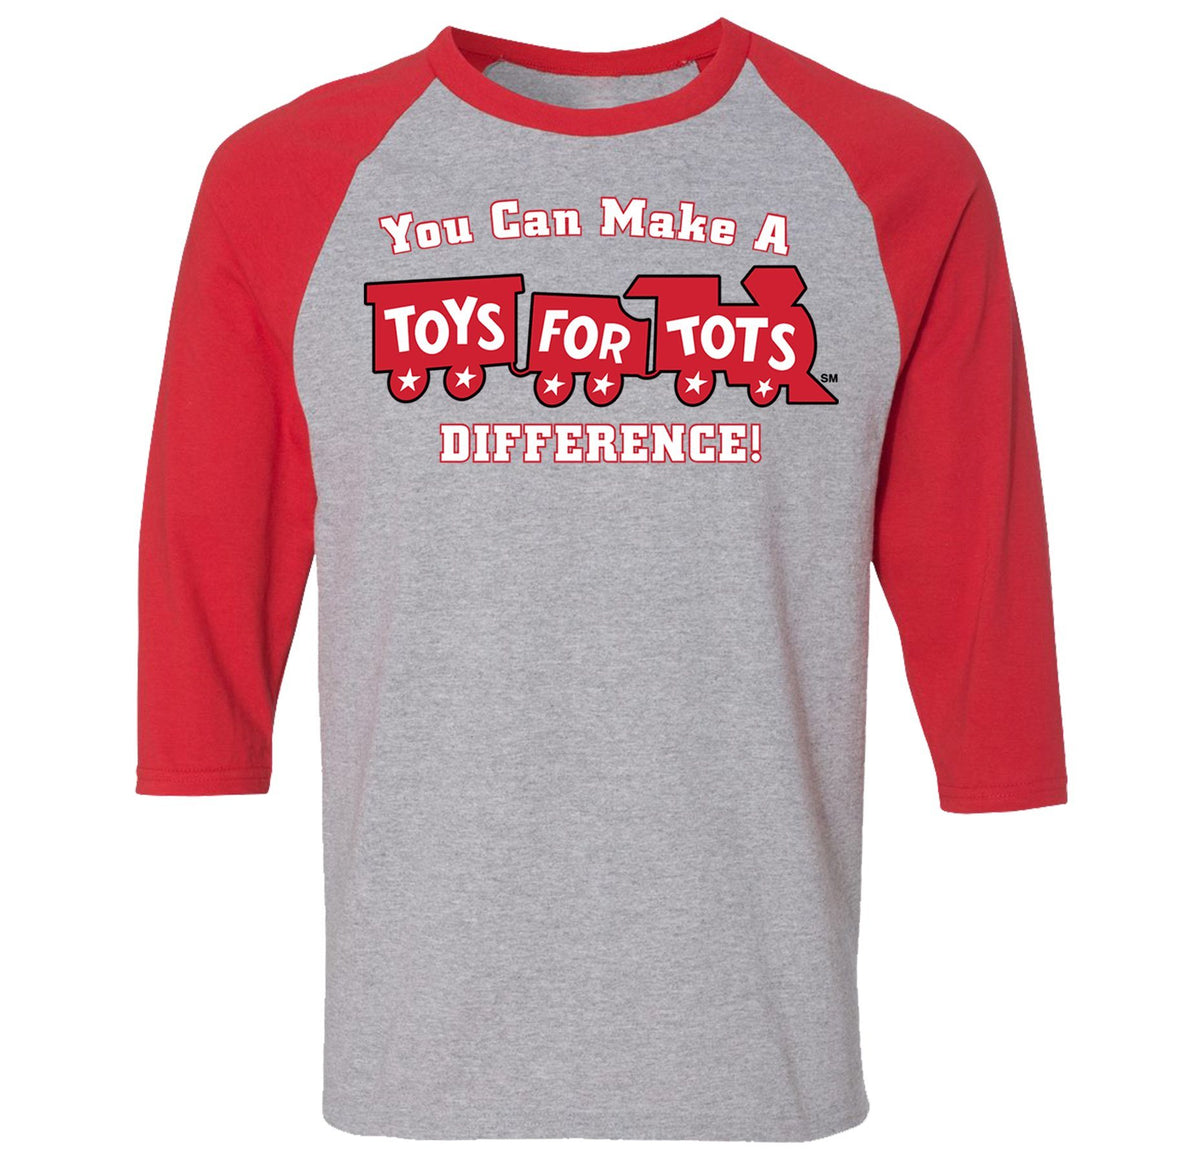 TFT 3/4 Raglan T-Shirt TFT Shirt Marine Corps Direct S GRAY/RED with MAKE A DIFFERENCE 